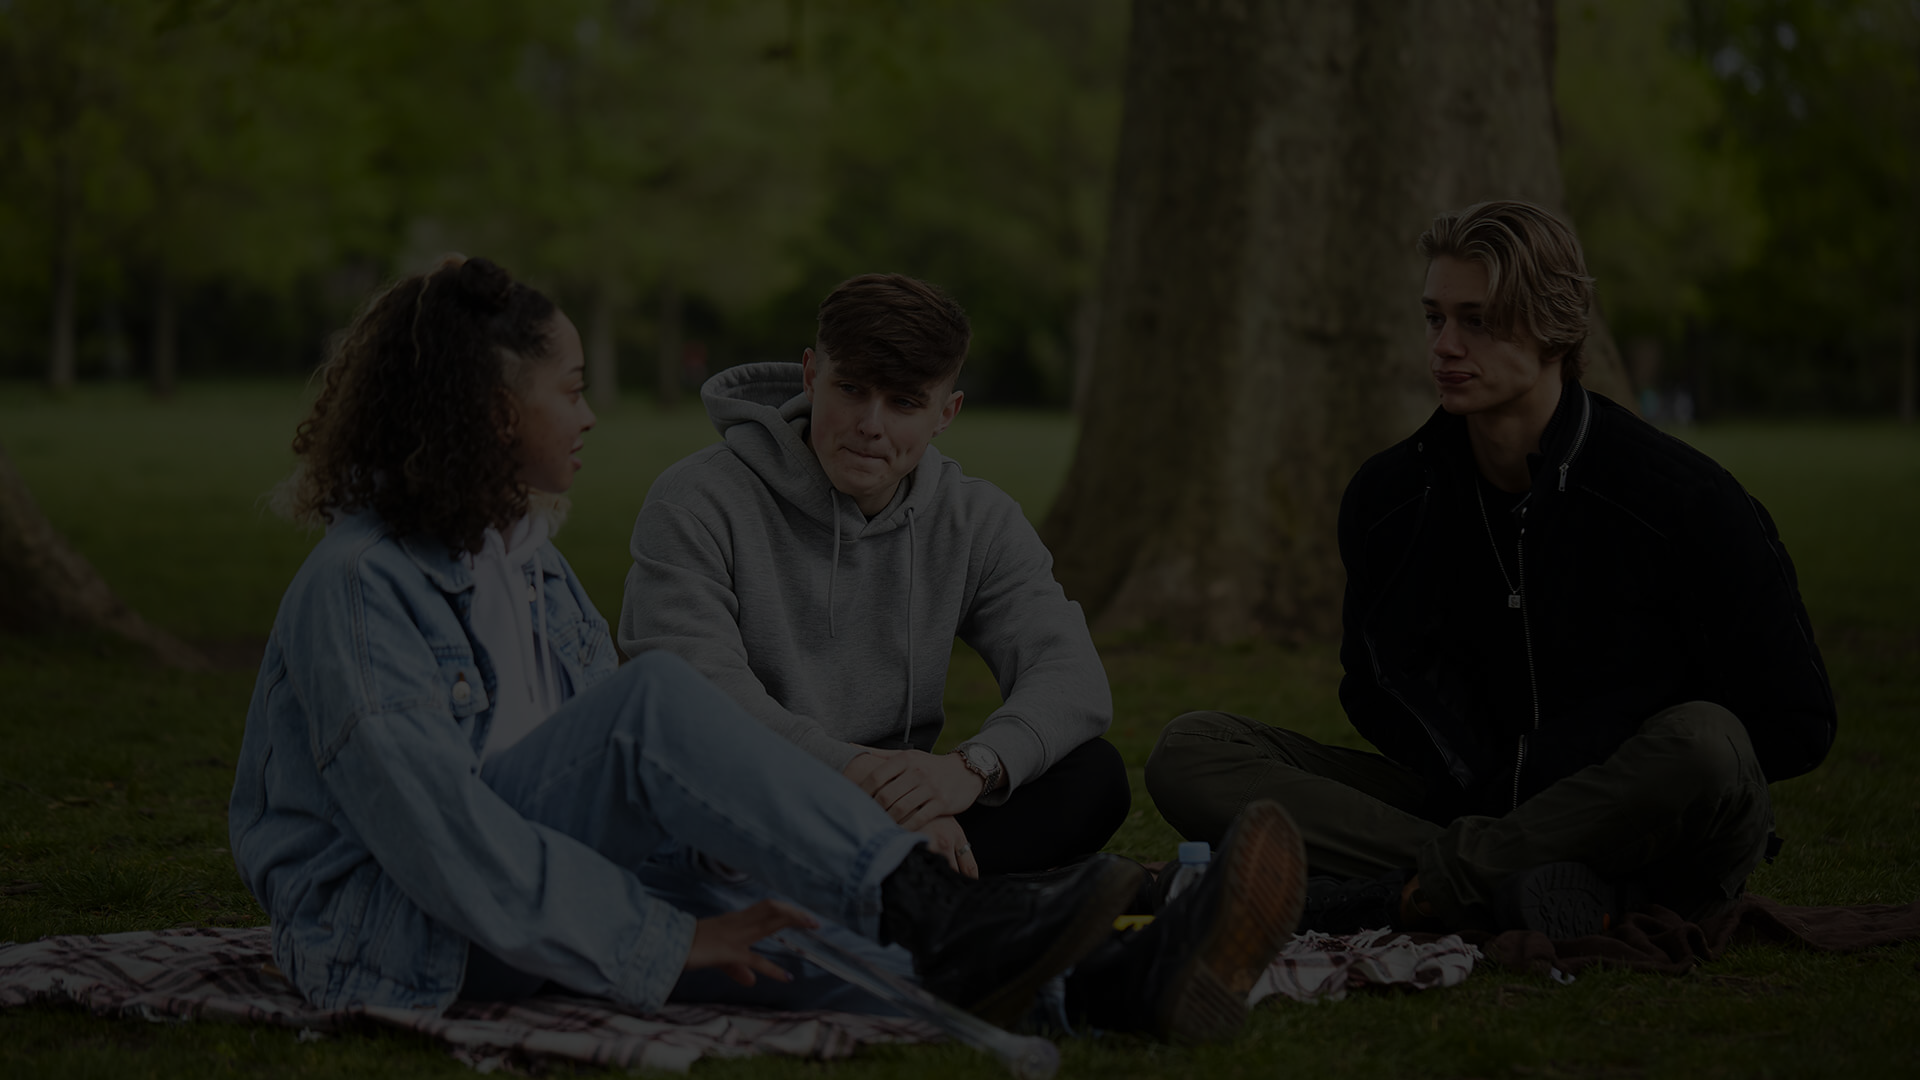 Three young people talking in the park.